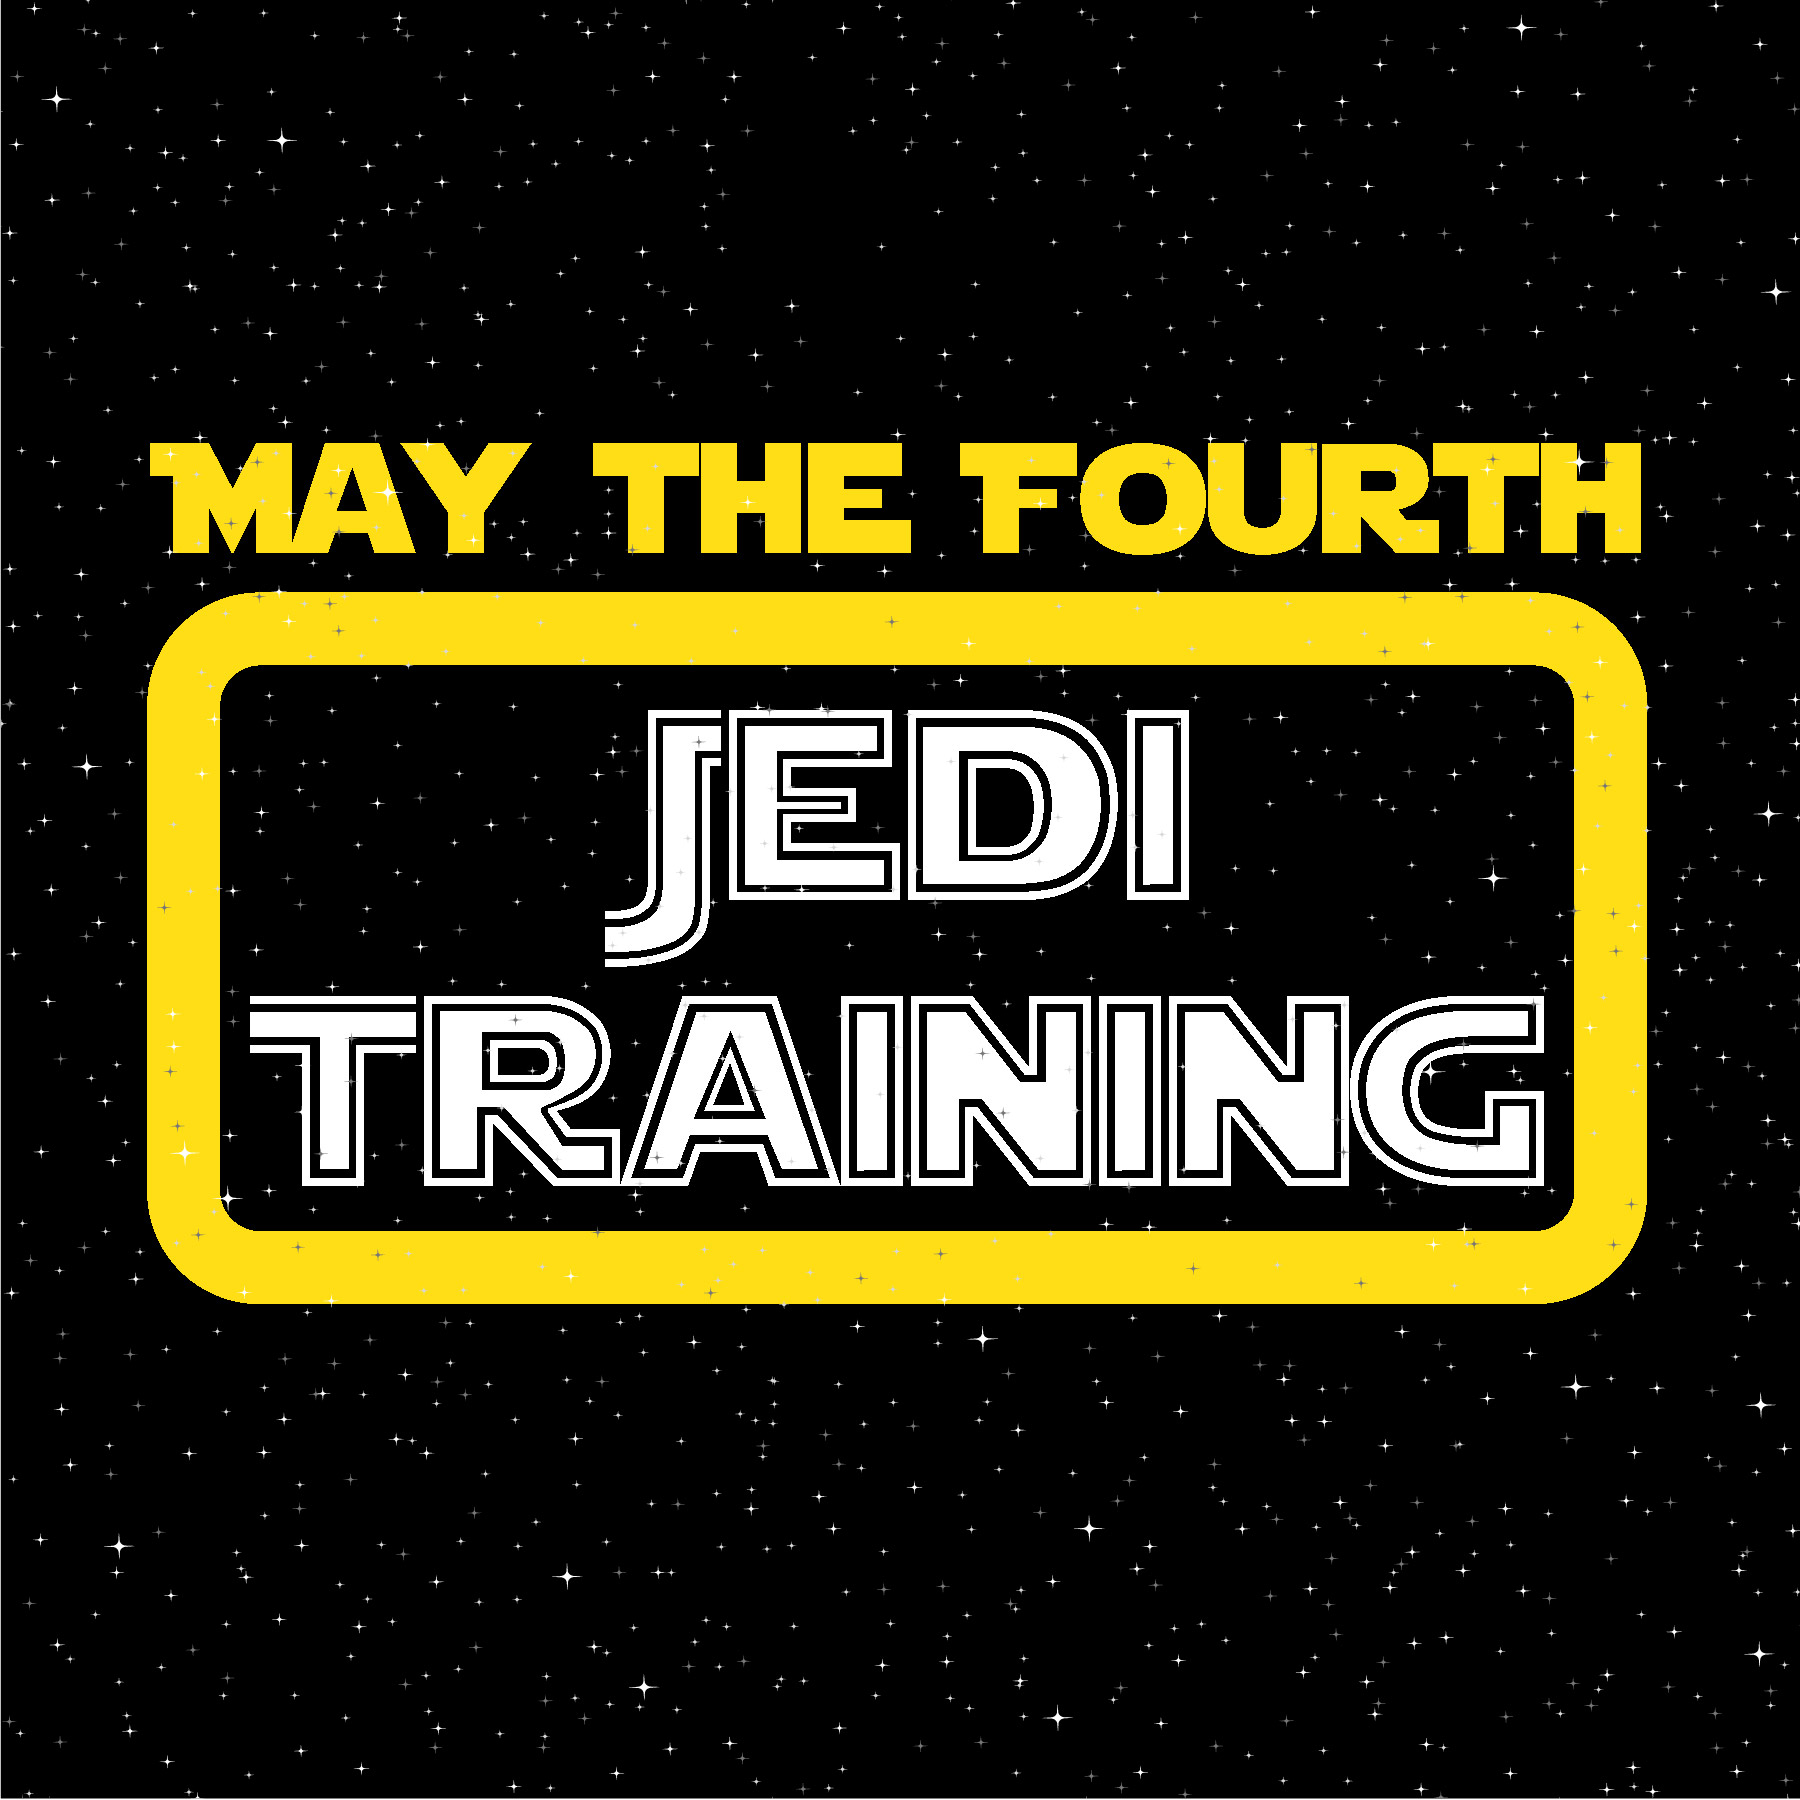 "May the Fourth Jedi Training" text on a space background